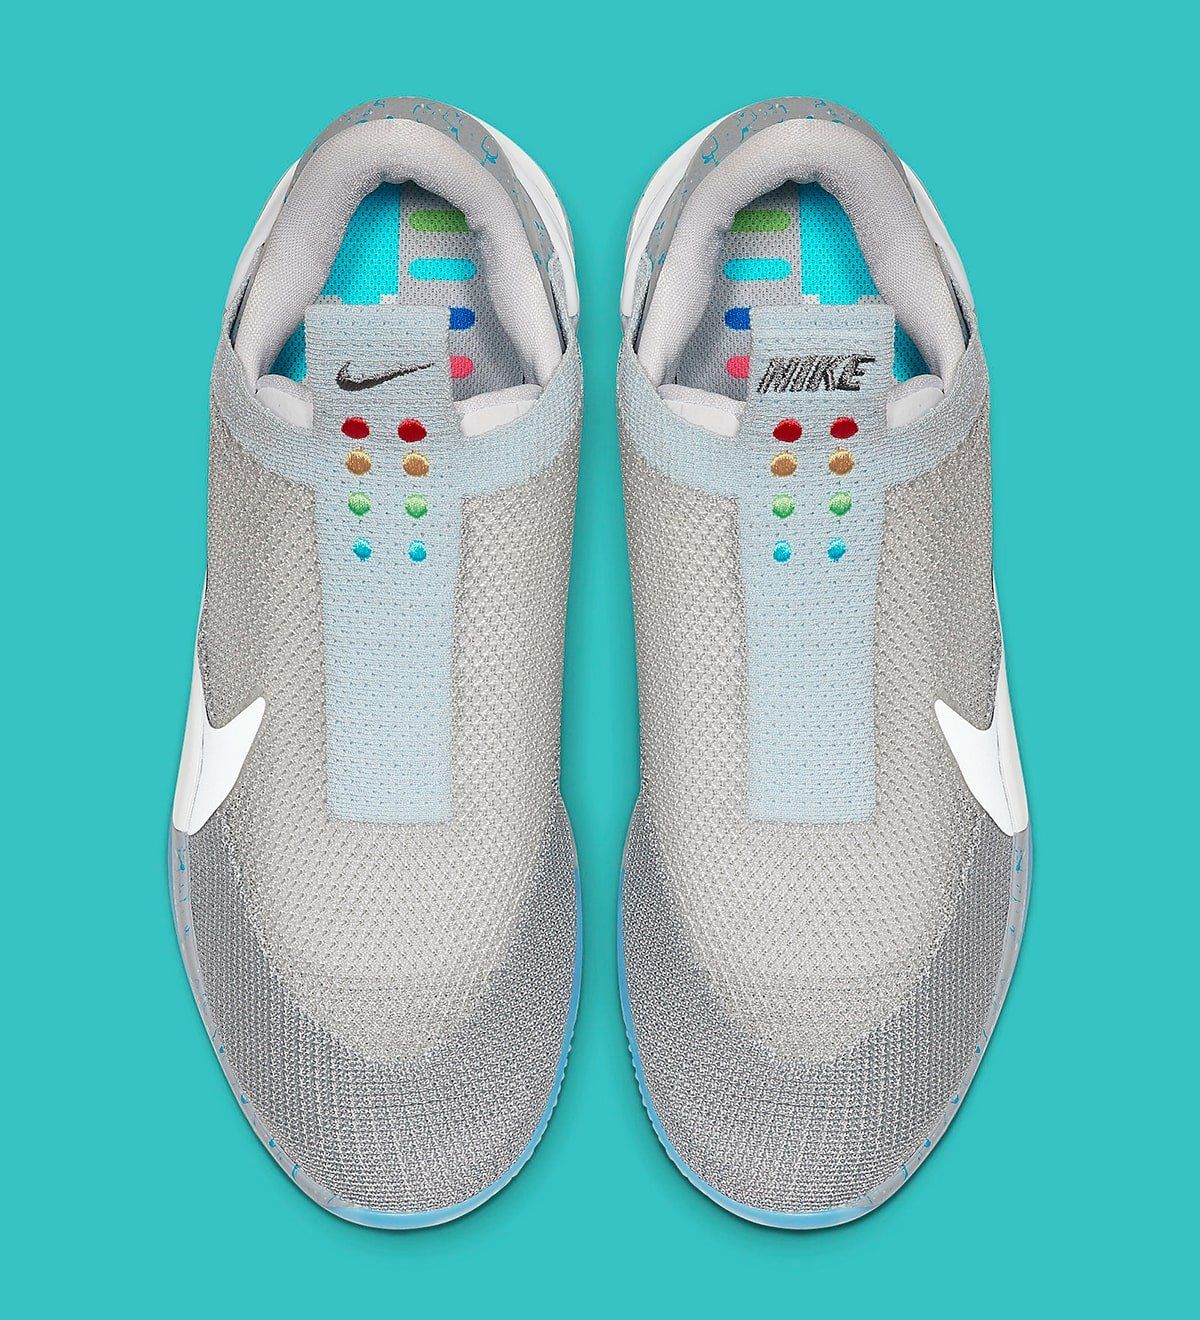 nike mag release date 2019